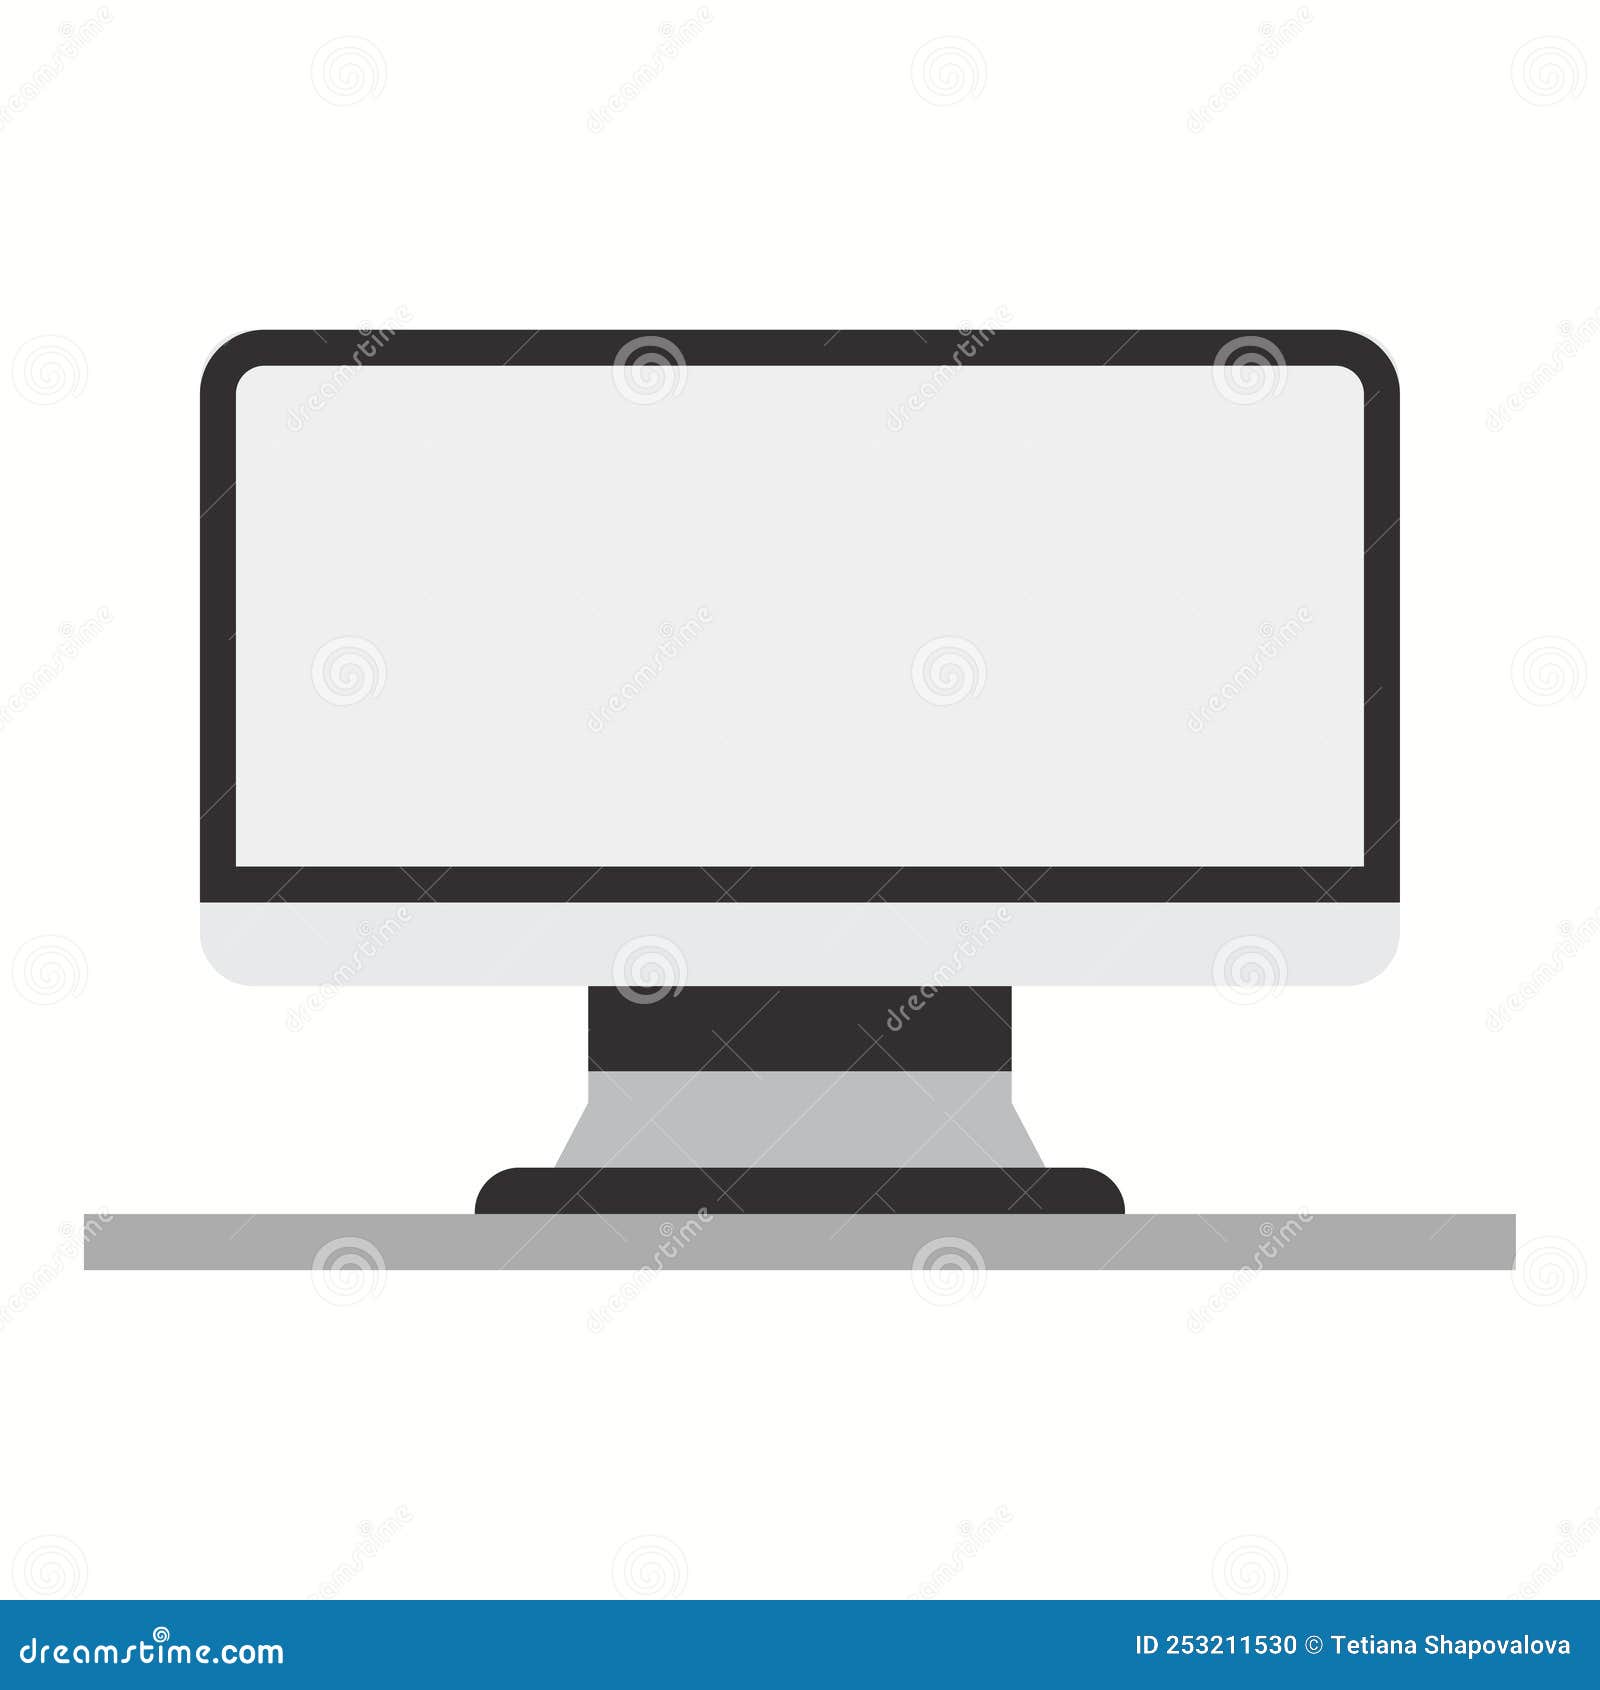 computer or monitor icon. 